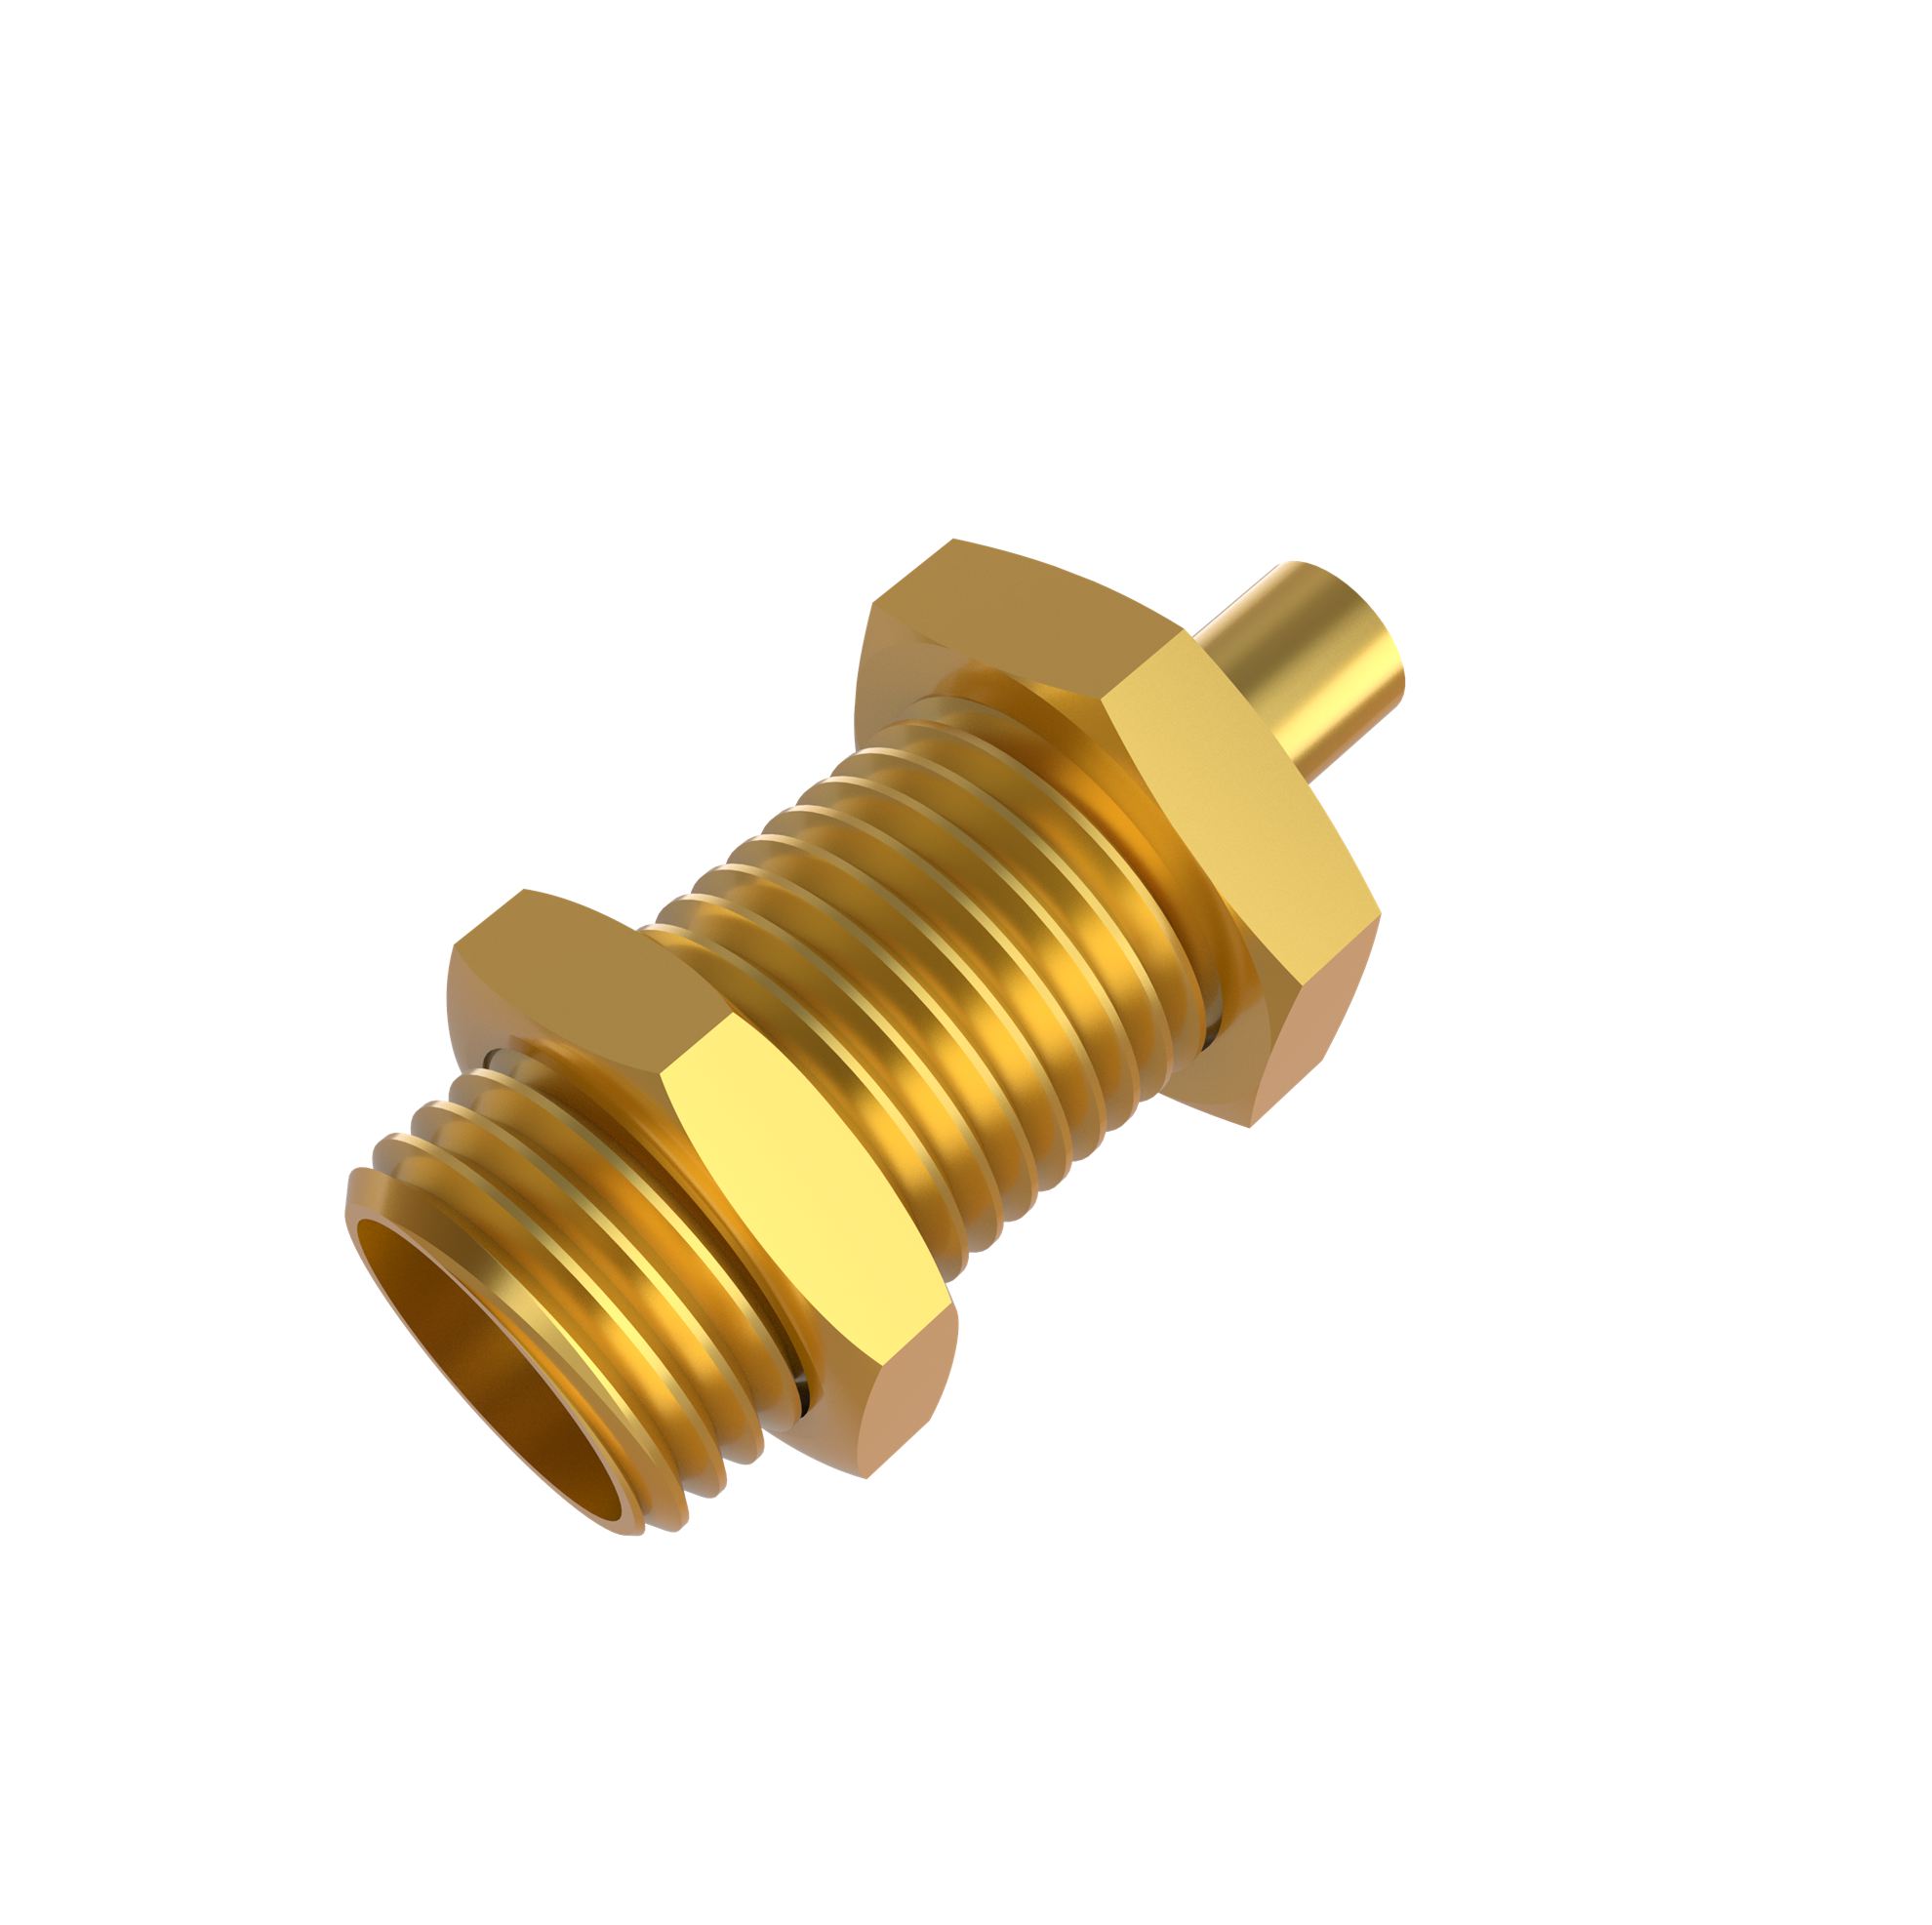 MCX Connector Jack Crimp Straight For 0.081 Cable